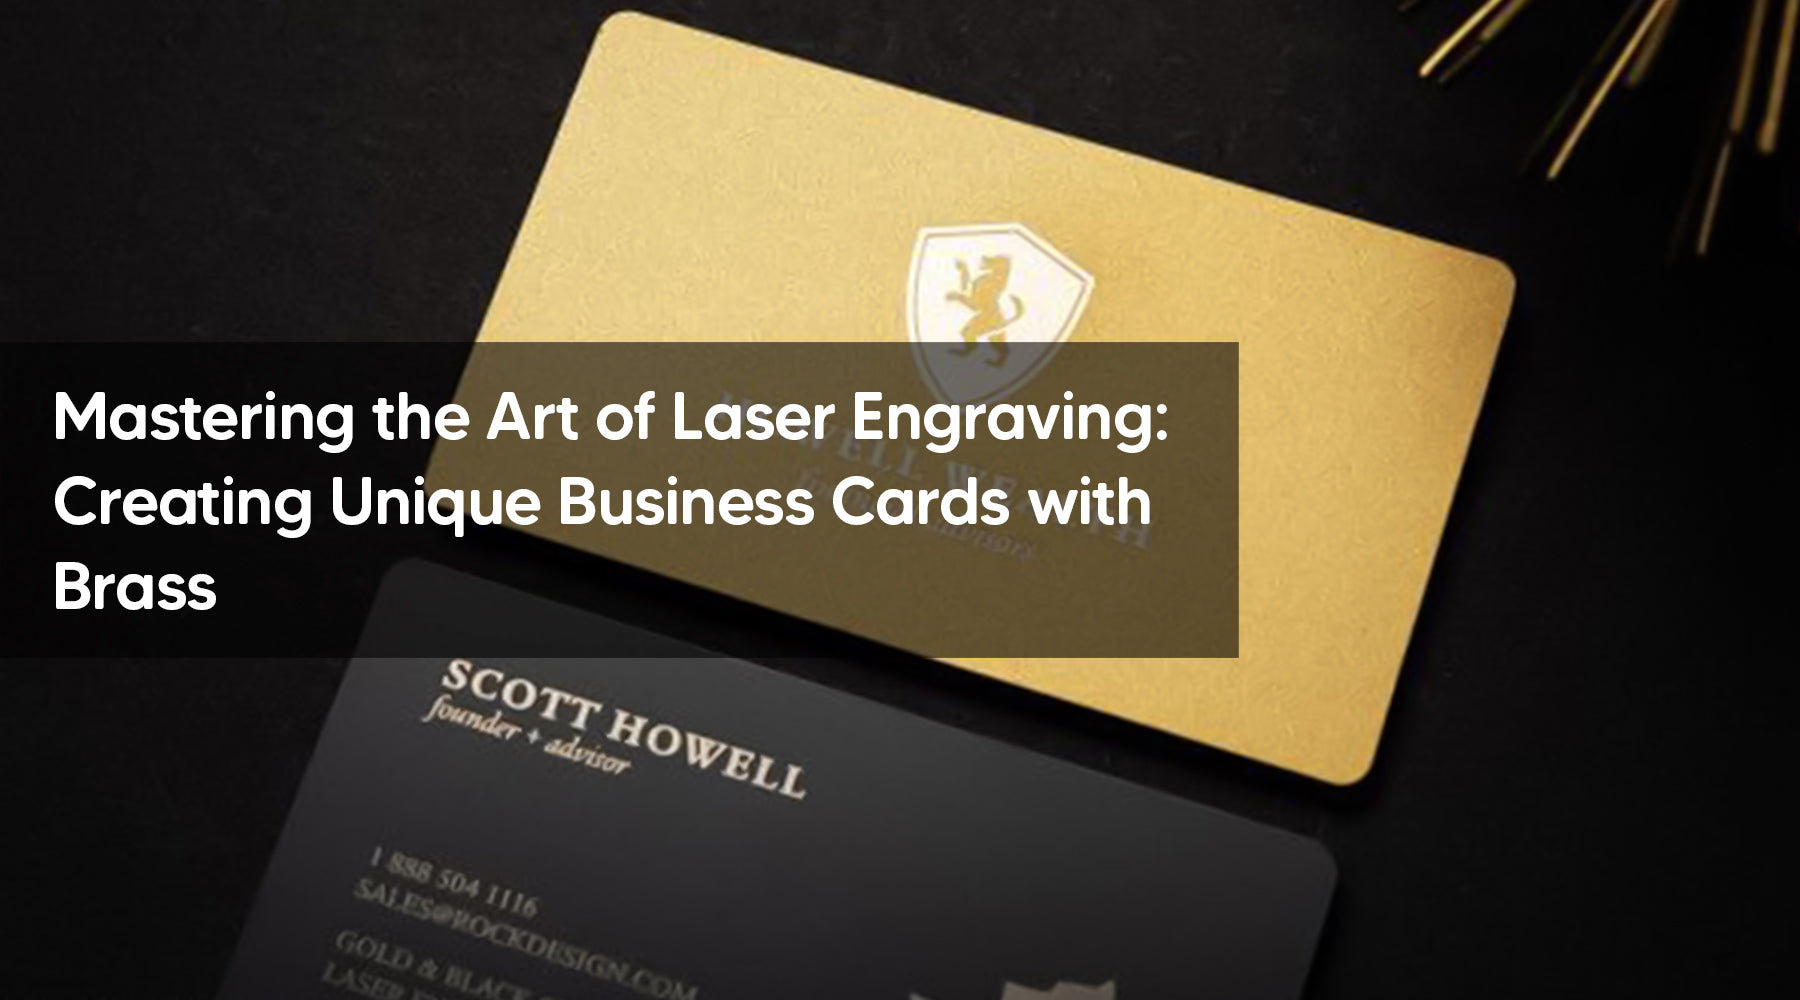 Mastering the Art of Laser Engraving: Creating Unique Business Cards with Brass